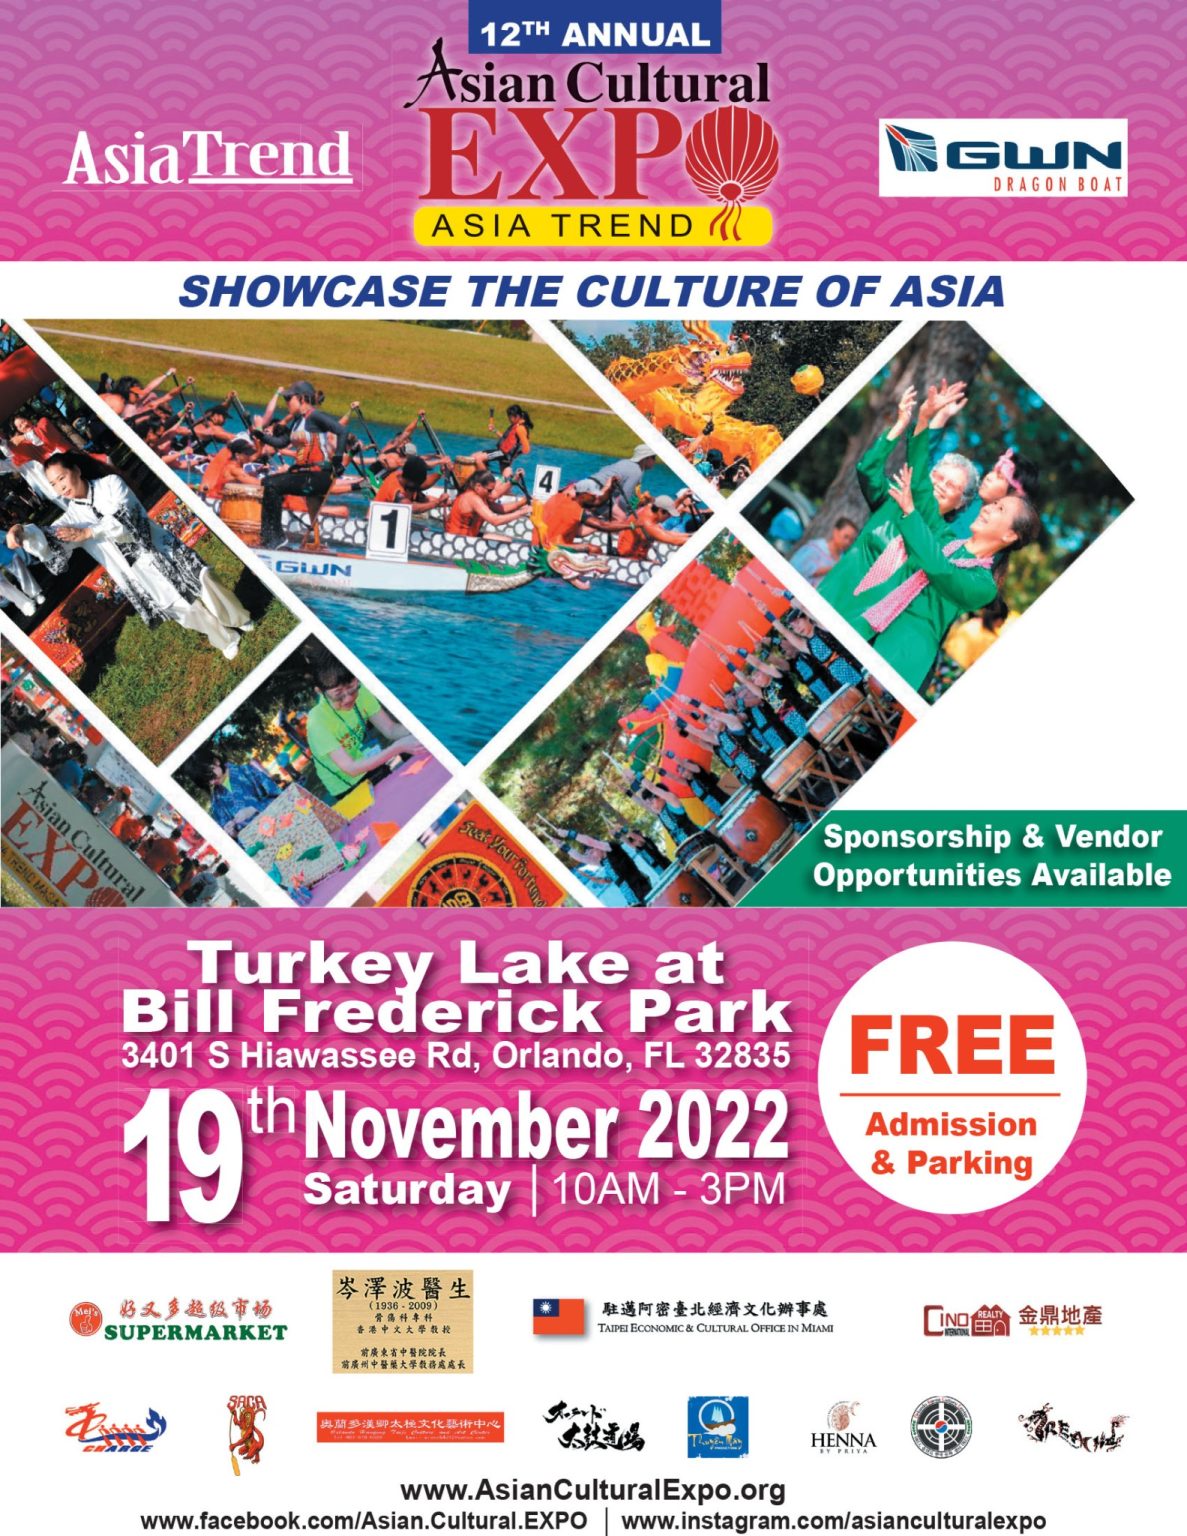 12th Annual Asian Cultural EXPO 2022 Asia Trend